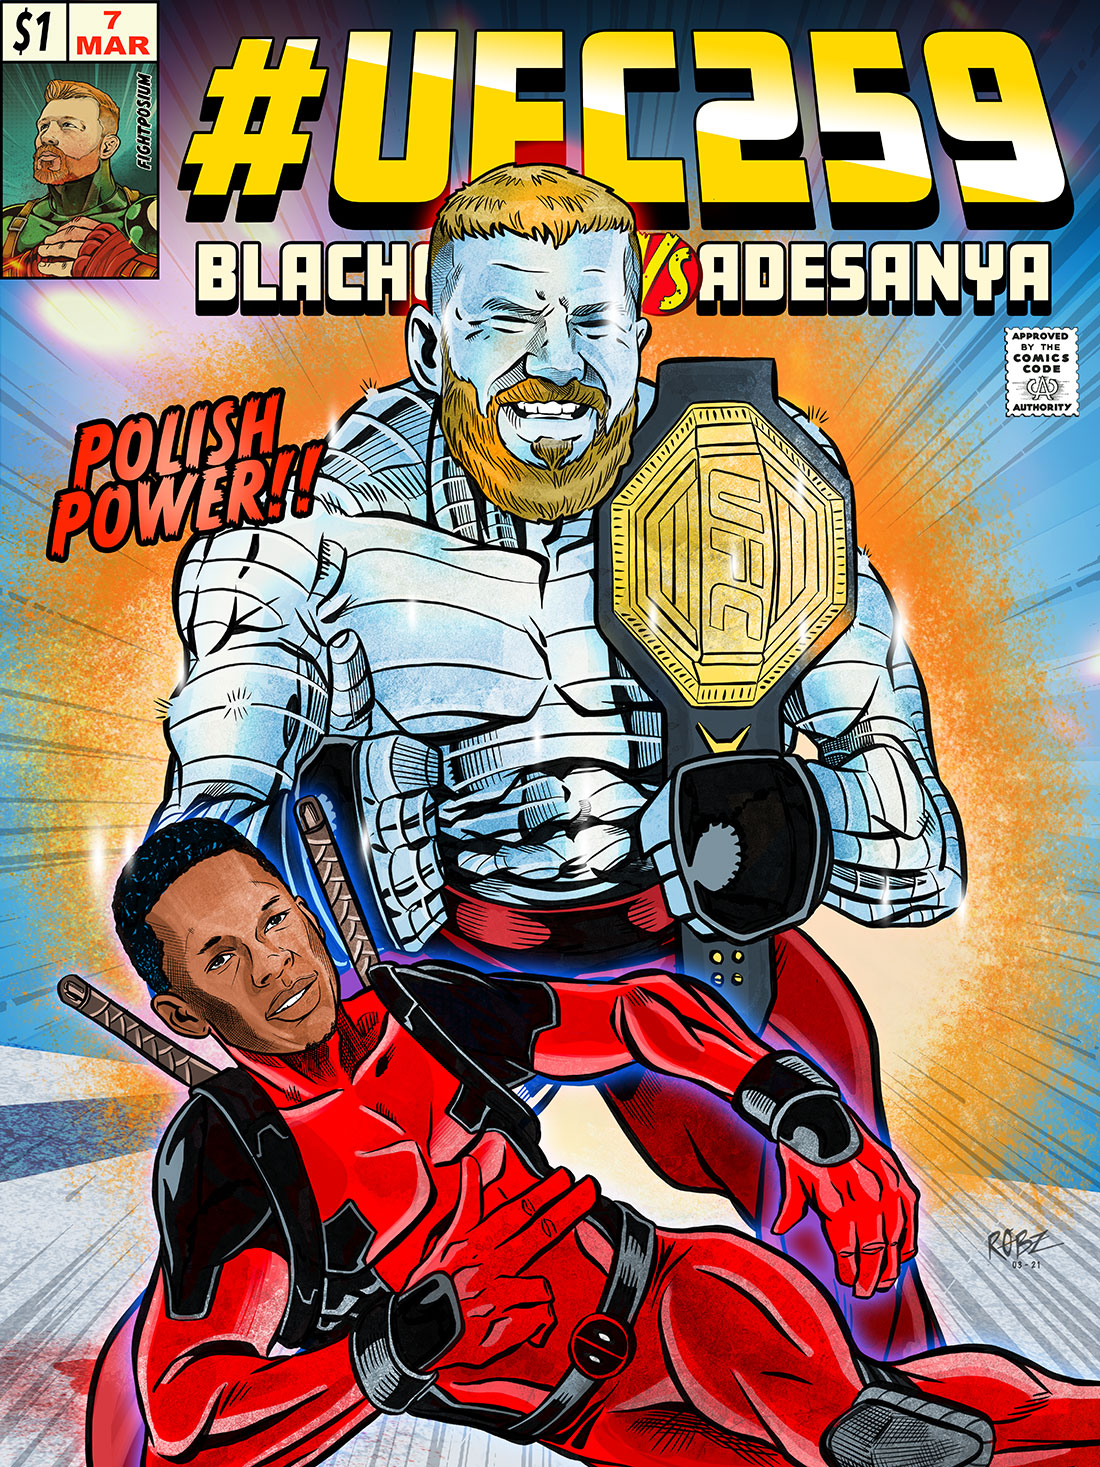 You are currently viewing Blachowicz VS Adesanya – Polish Power!